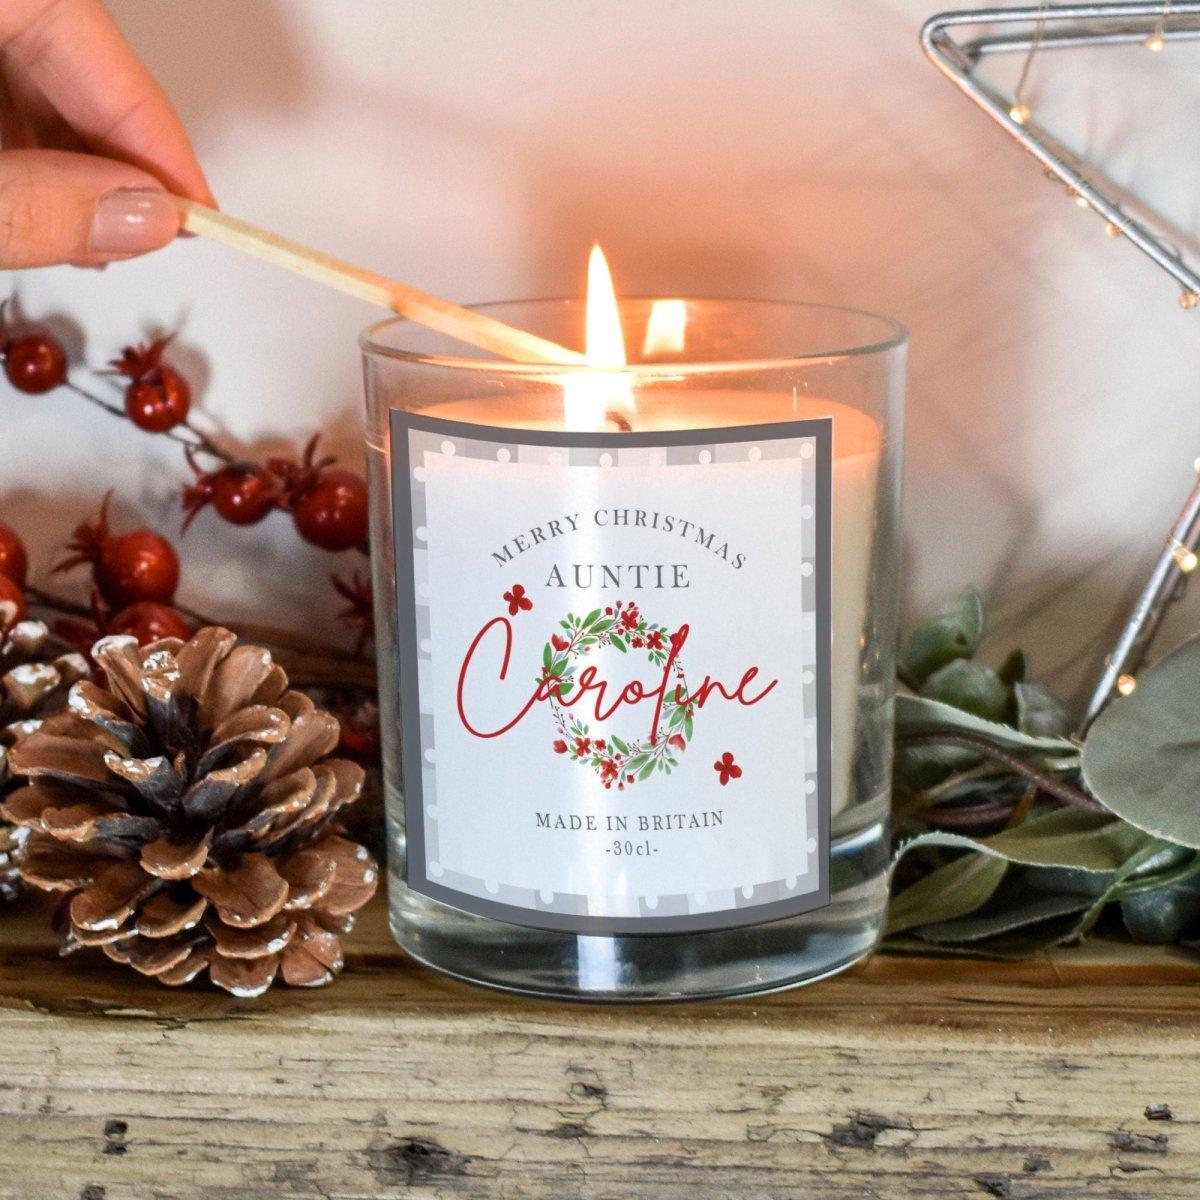 Personalised Auntie Christmas Candle, Auntie Candle Gift, Christmas Aunty Candle Gift, Aunt Christmas Gifts, Scented Candles,Christmas Gift - Amy Lucy